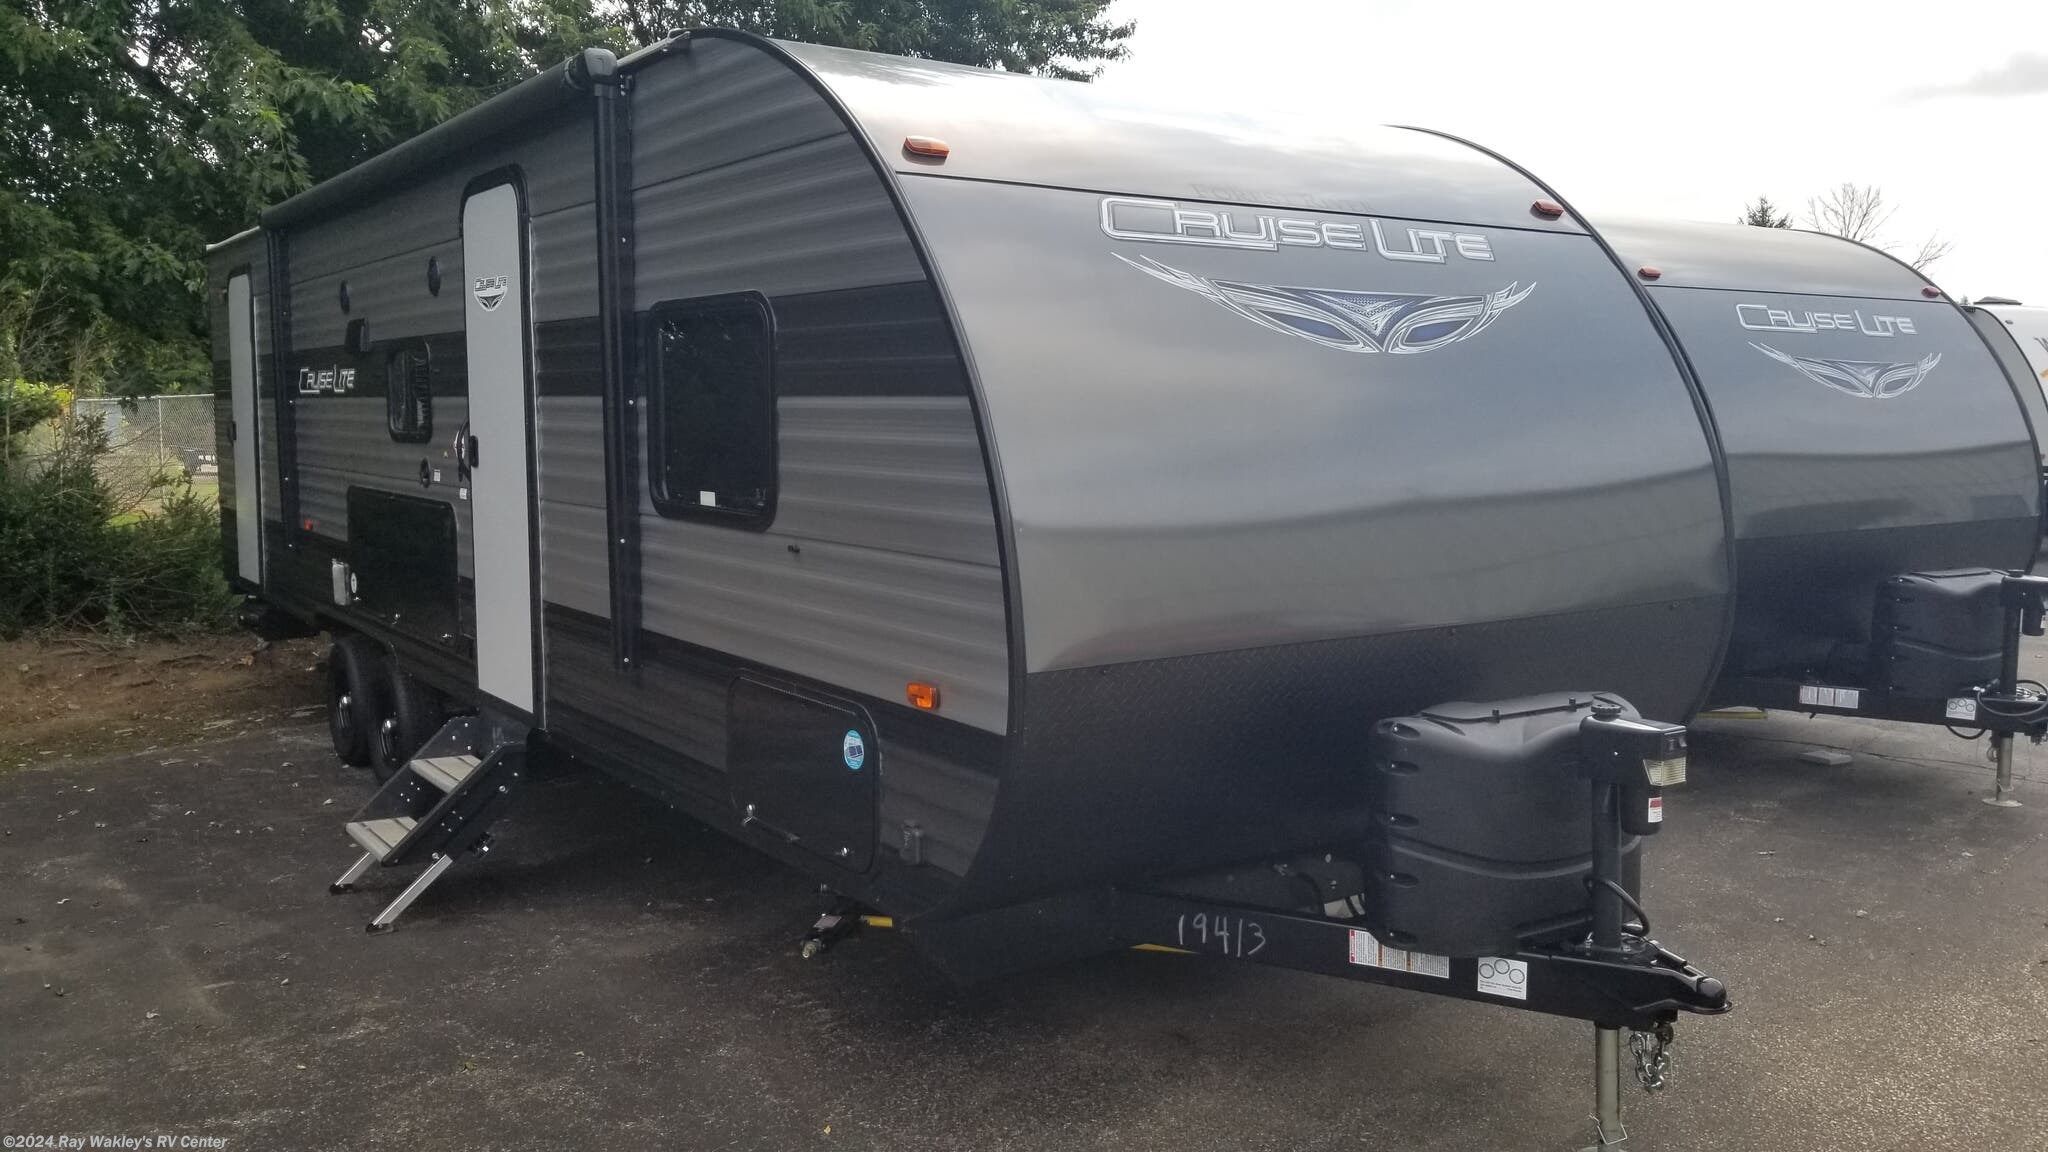 #59343A - 2019 Forest River Salem Cruise Lite 263BHXL for sale in North East PA 2019 Forest River Salem Cruise Lite 263bhxl